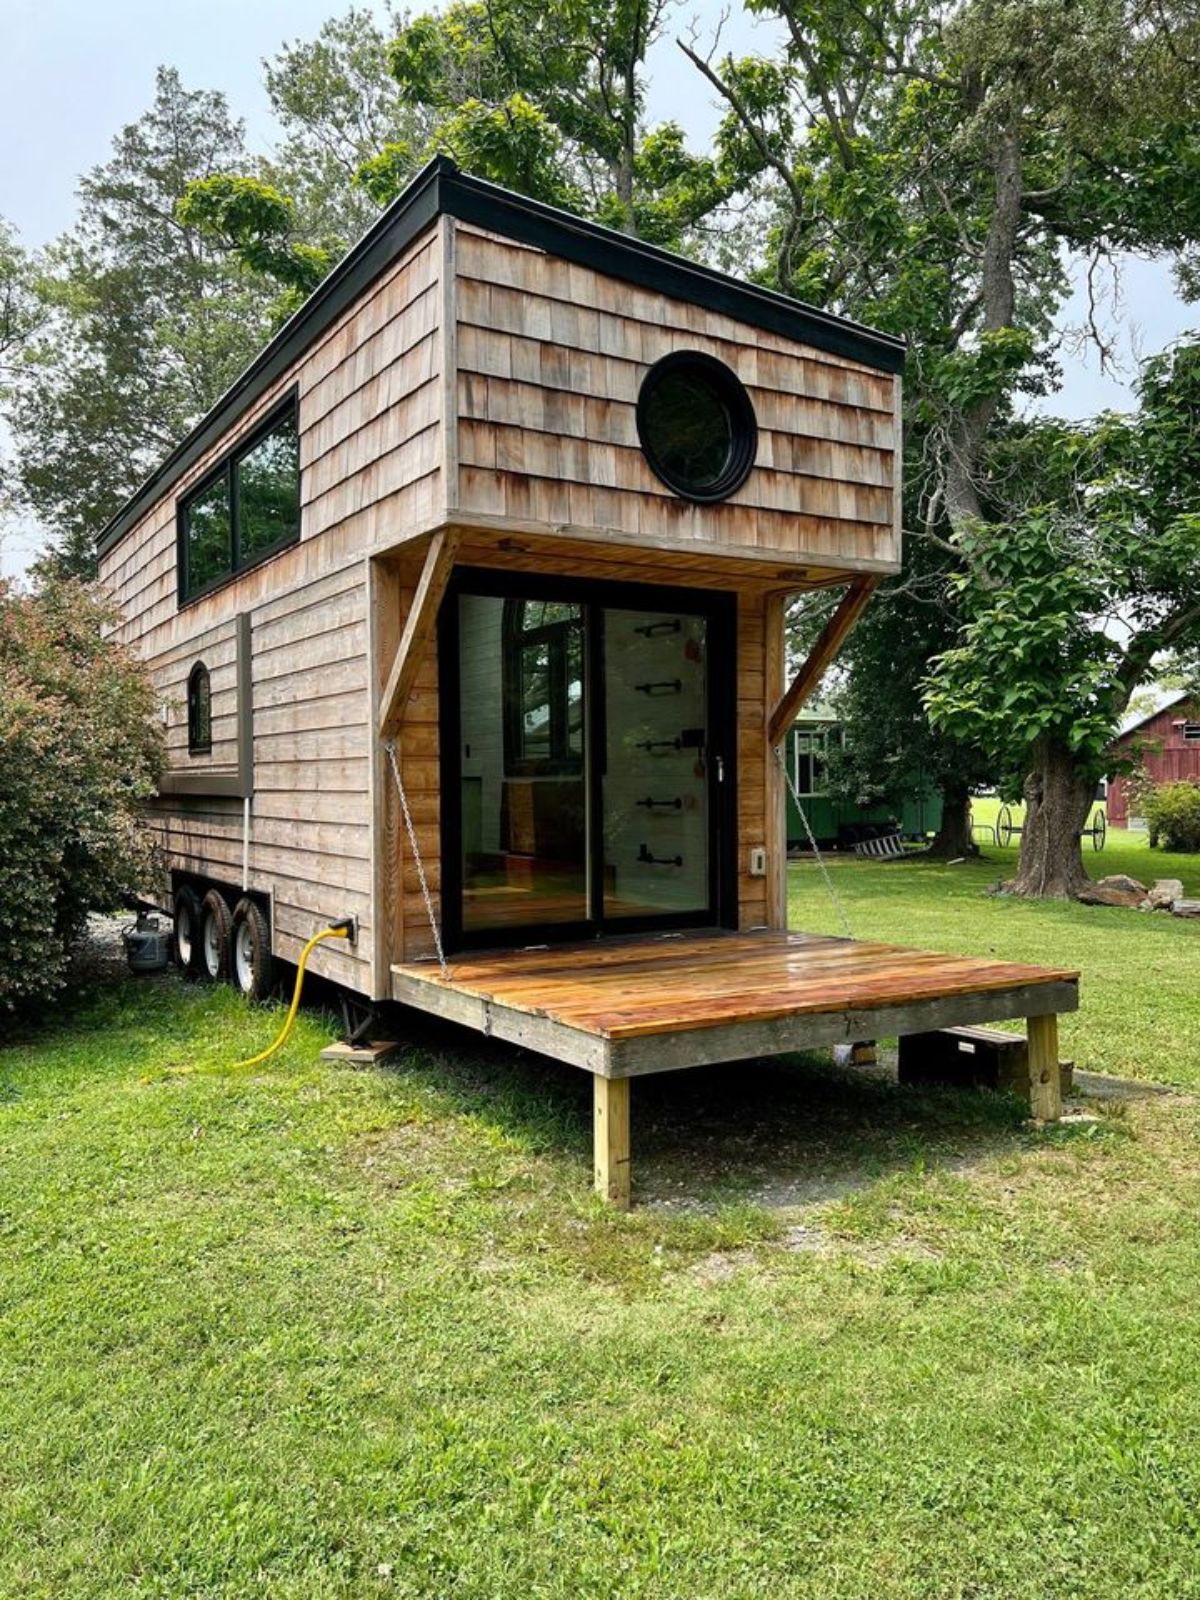 small porch outside the main entrance door of 24' adorable tiny home